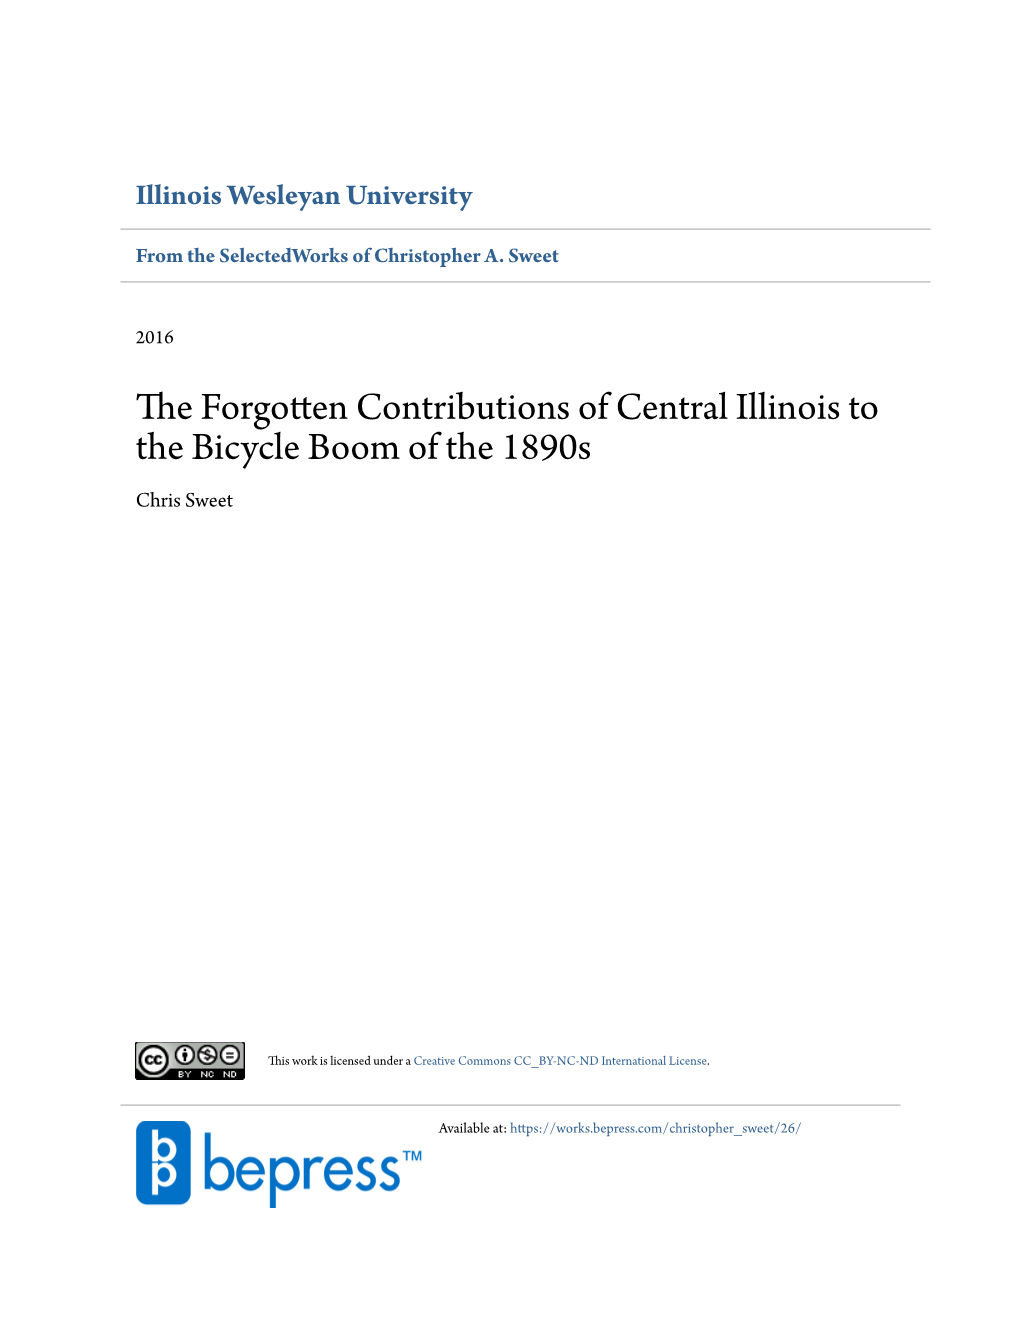 The Forgotten Contributions of Central Illinois to the Bicycle Boom of The